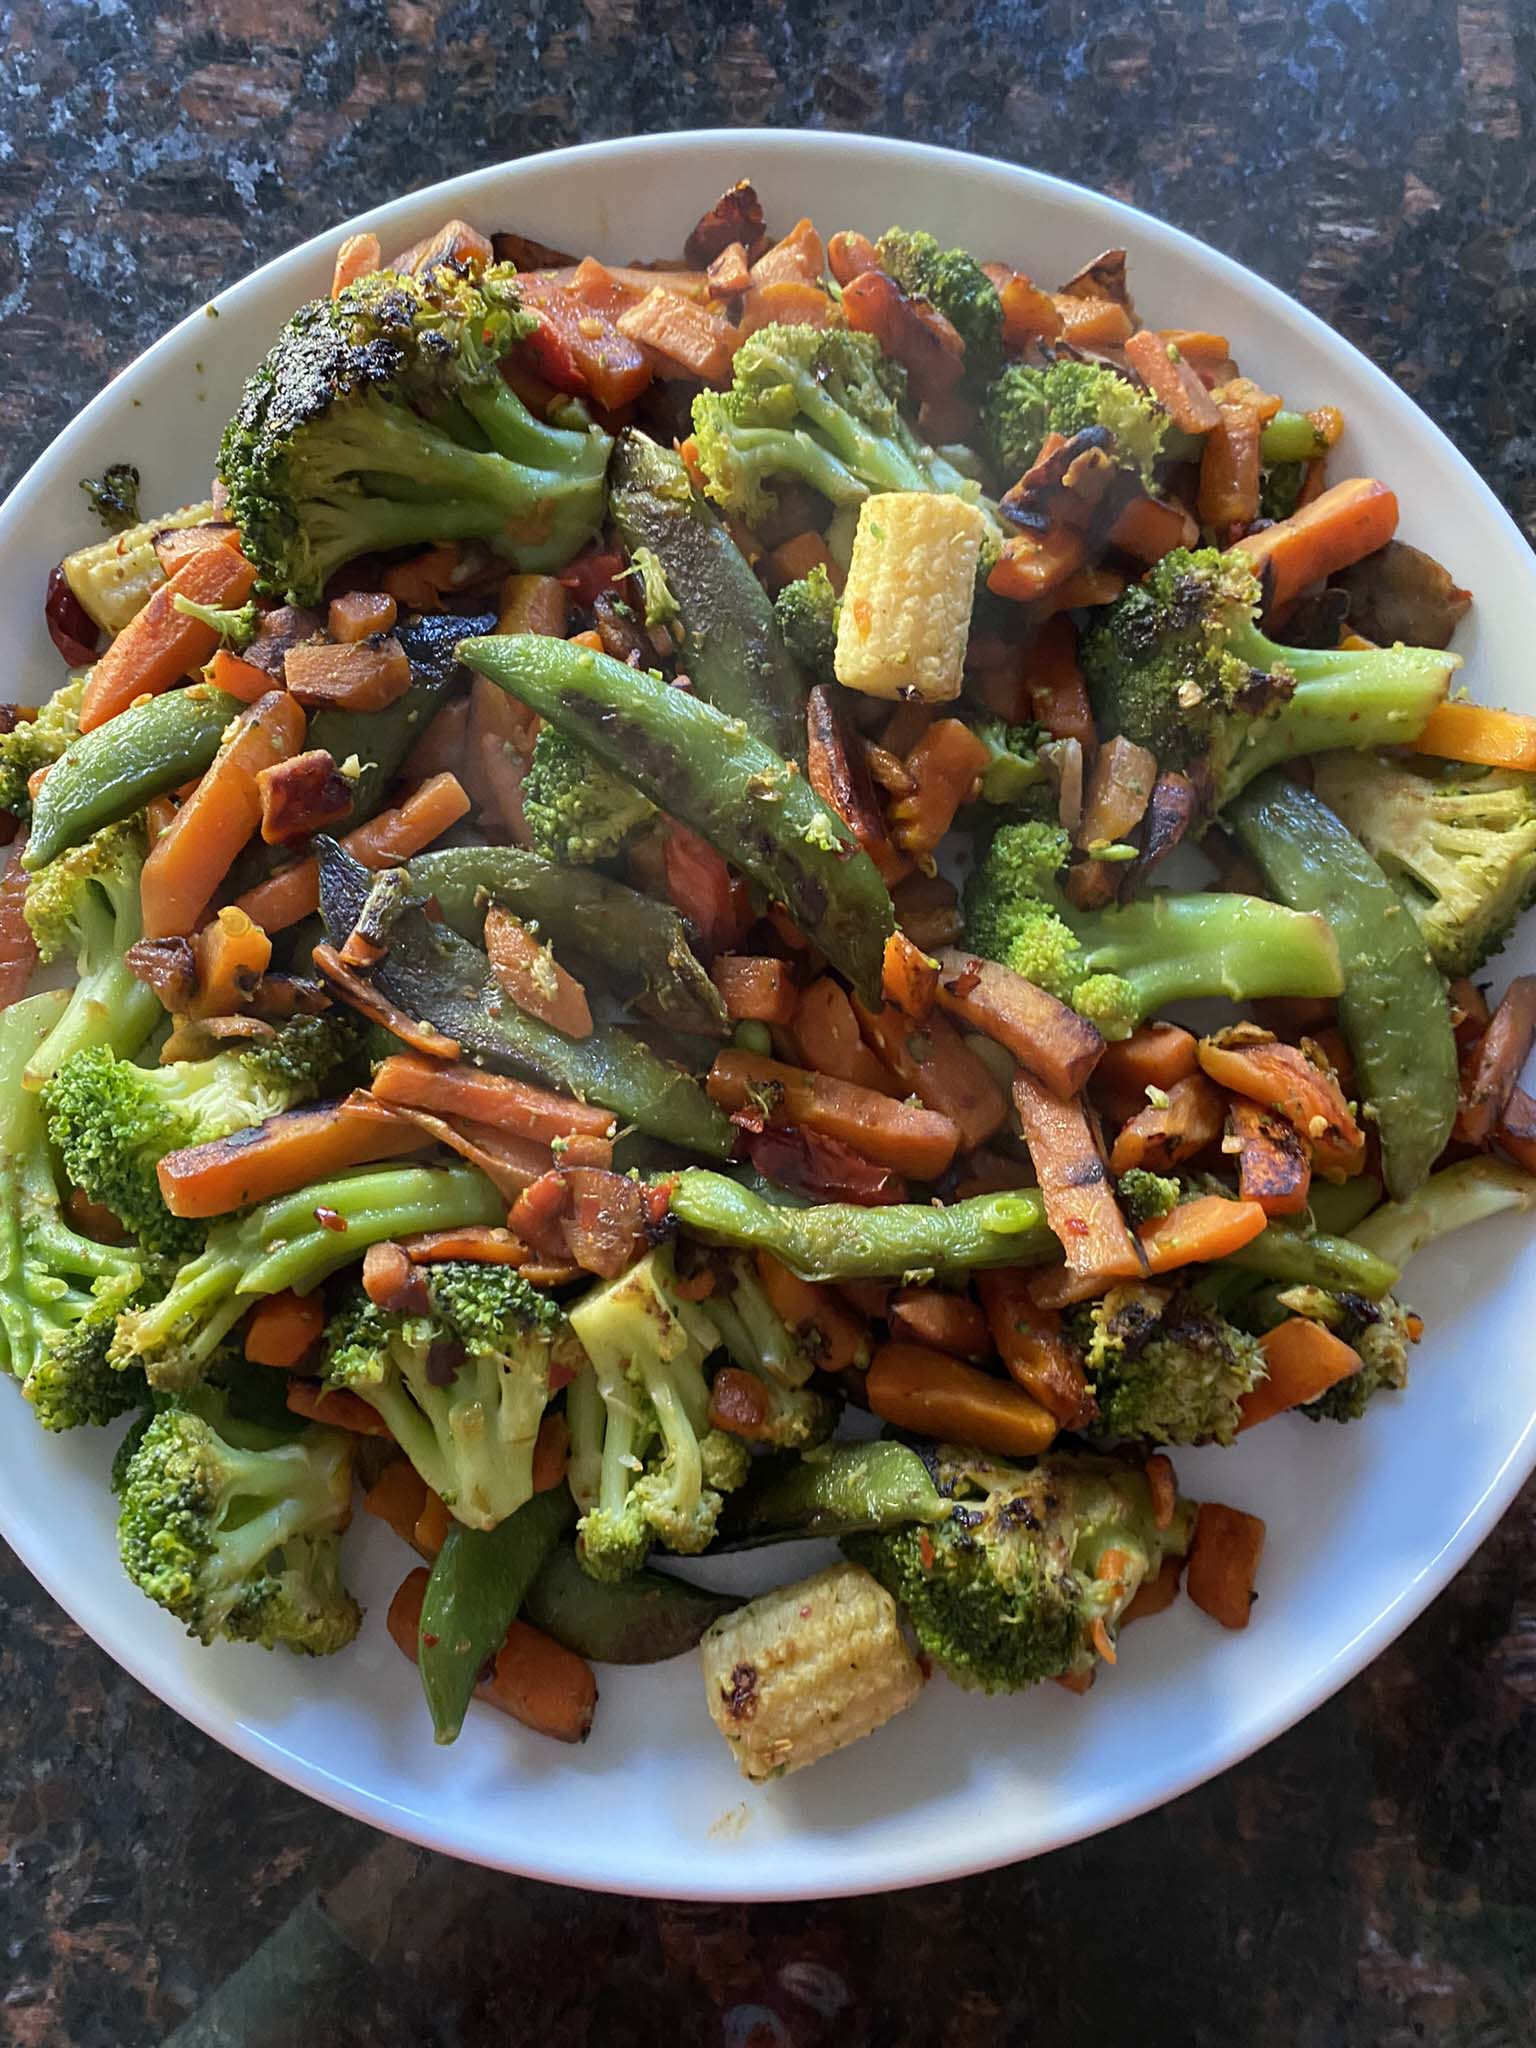 Sauteed vegetables on a plate.